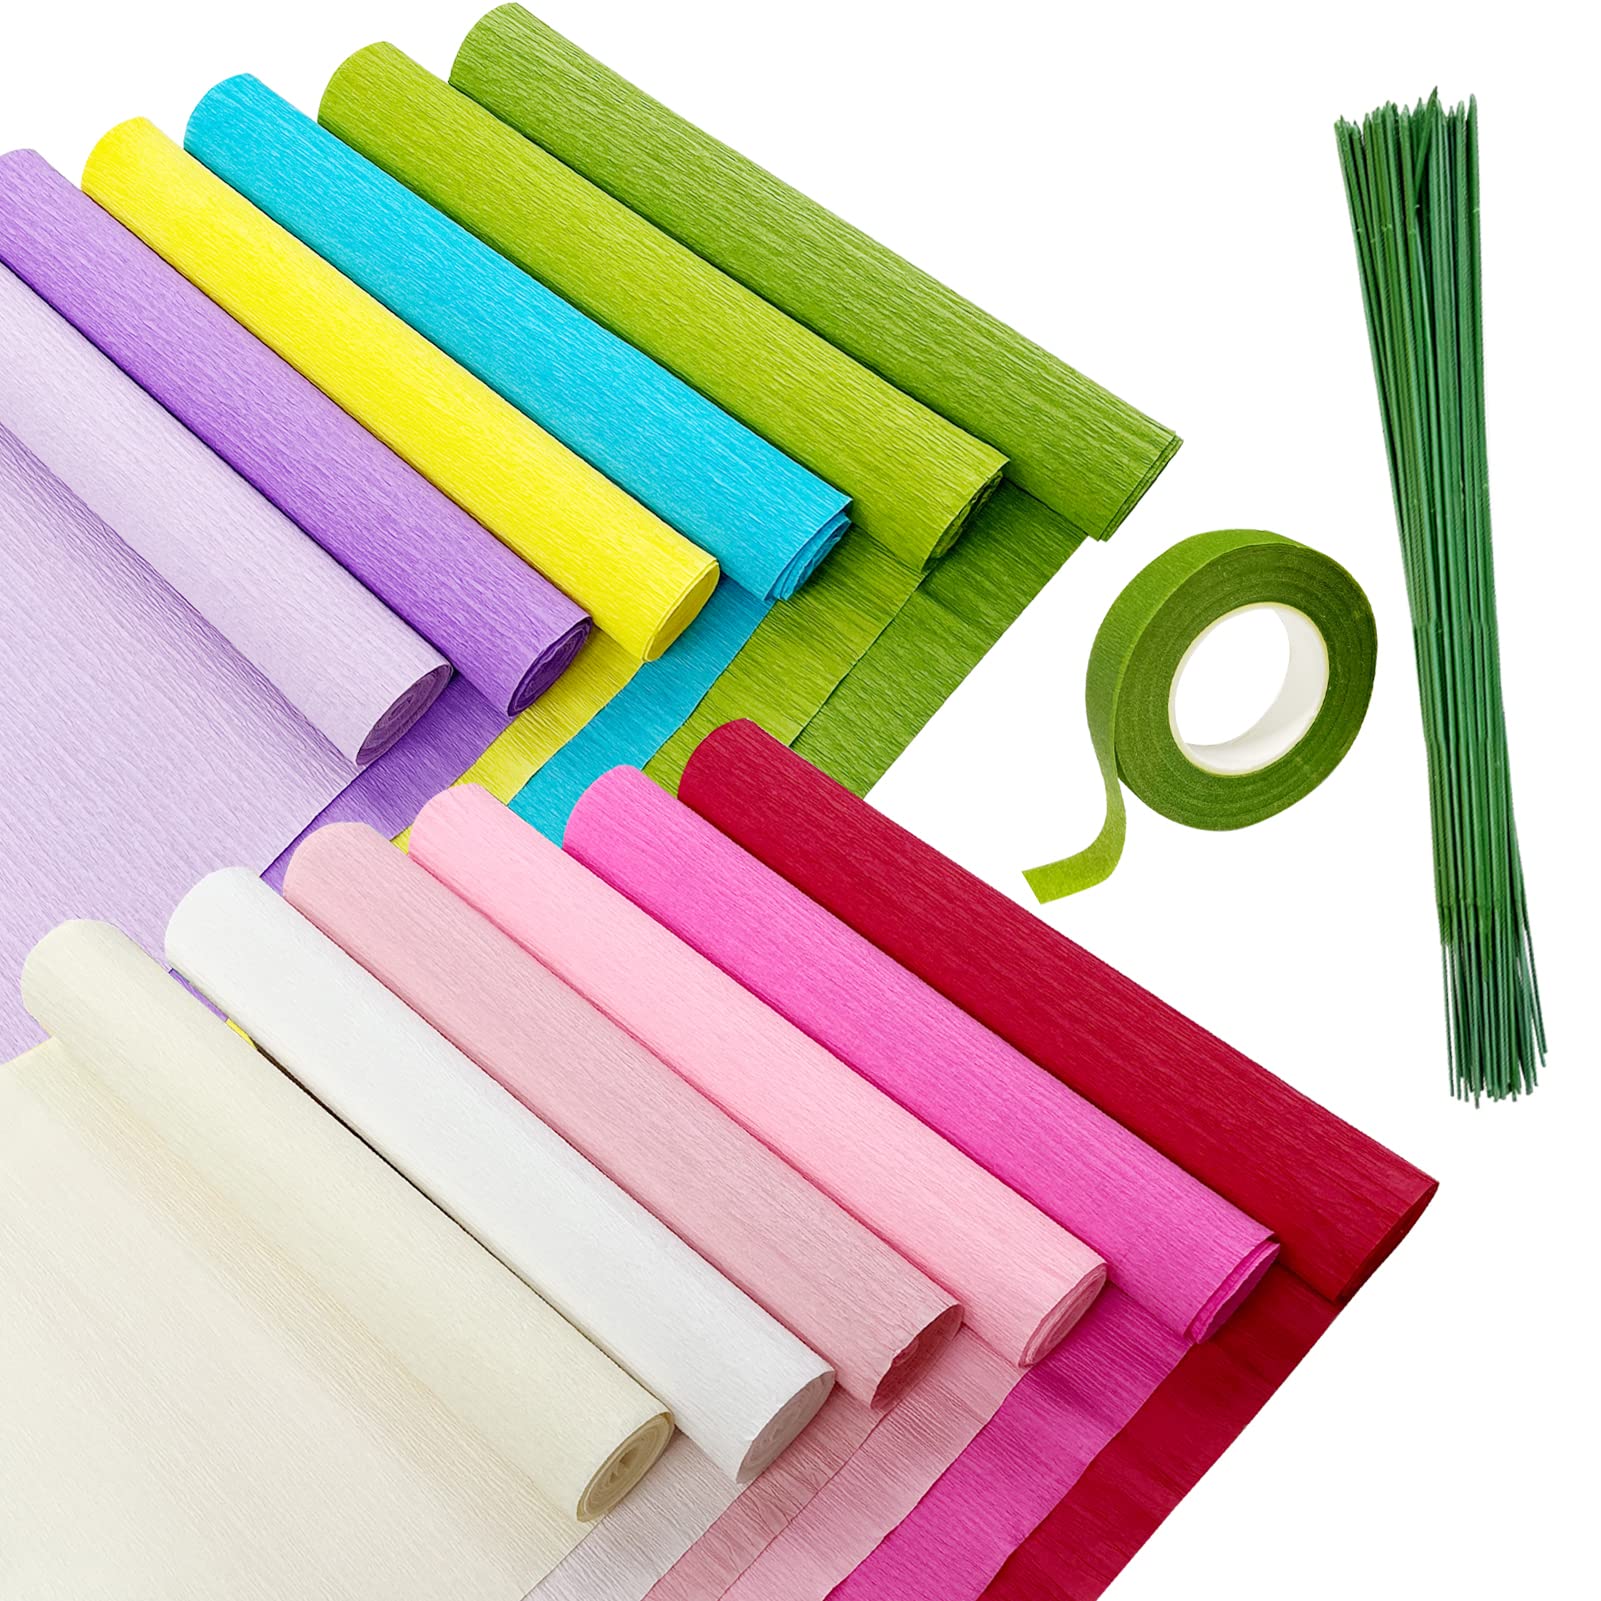 Cieovo Crepe Paper Flower DIY Kits, 12 Rolls Rainbow Bright Colors Crepe  Paper Rolls Green Floral Tape and 50 Green Floral Iron Wire for Wedding  Festival Party Wreath Making Supplies DIY Flower